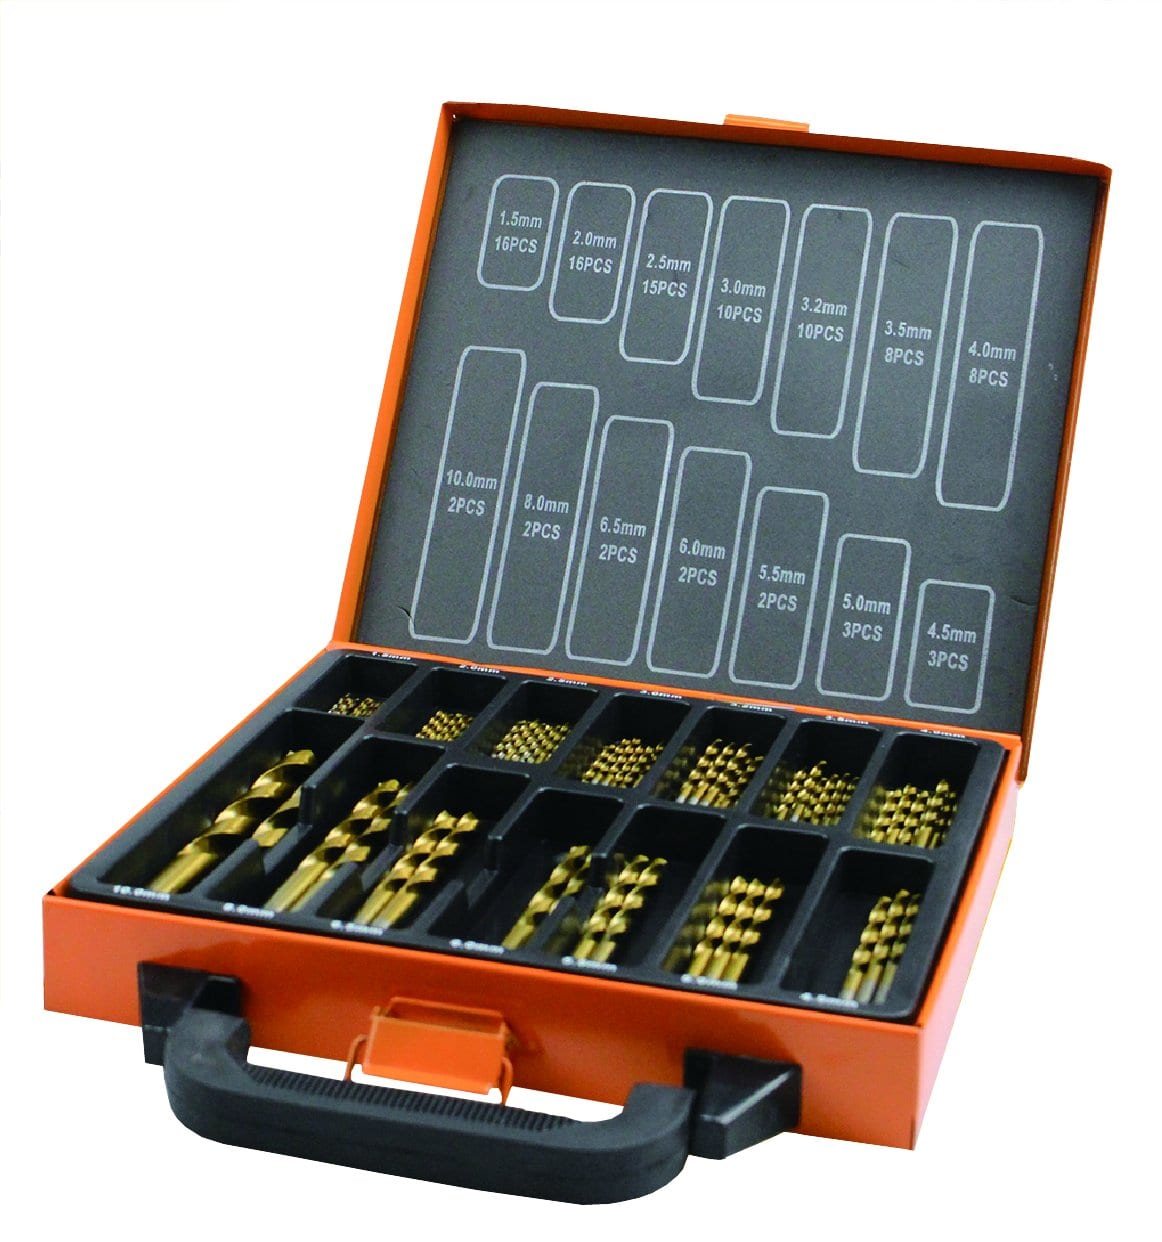 15 pieces - 14 roll forged TiN coated HSS metal drill bits, Ø 1.5